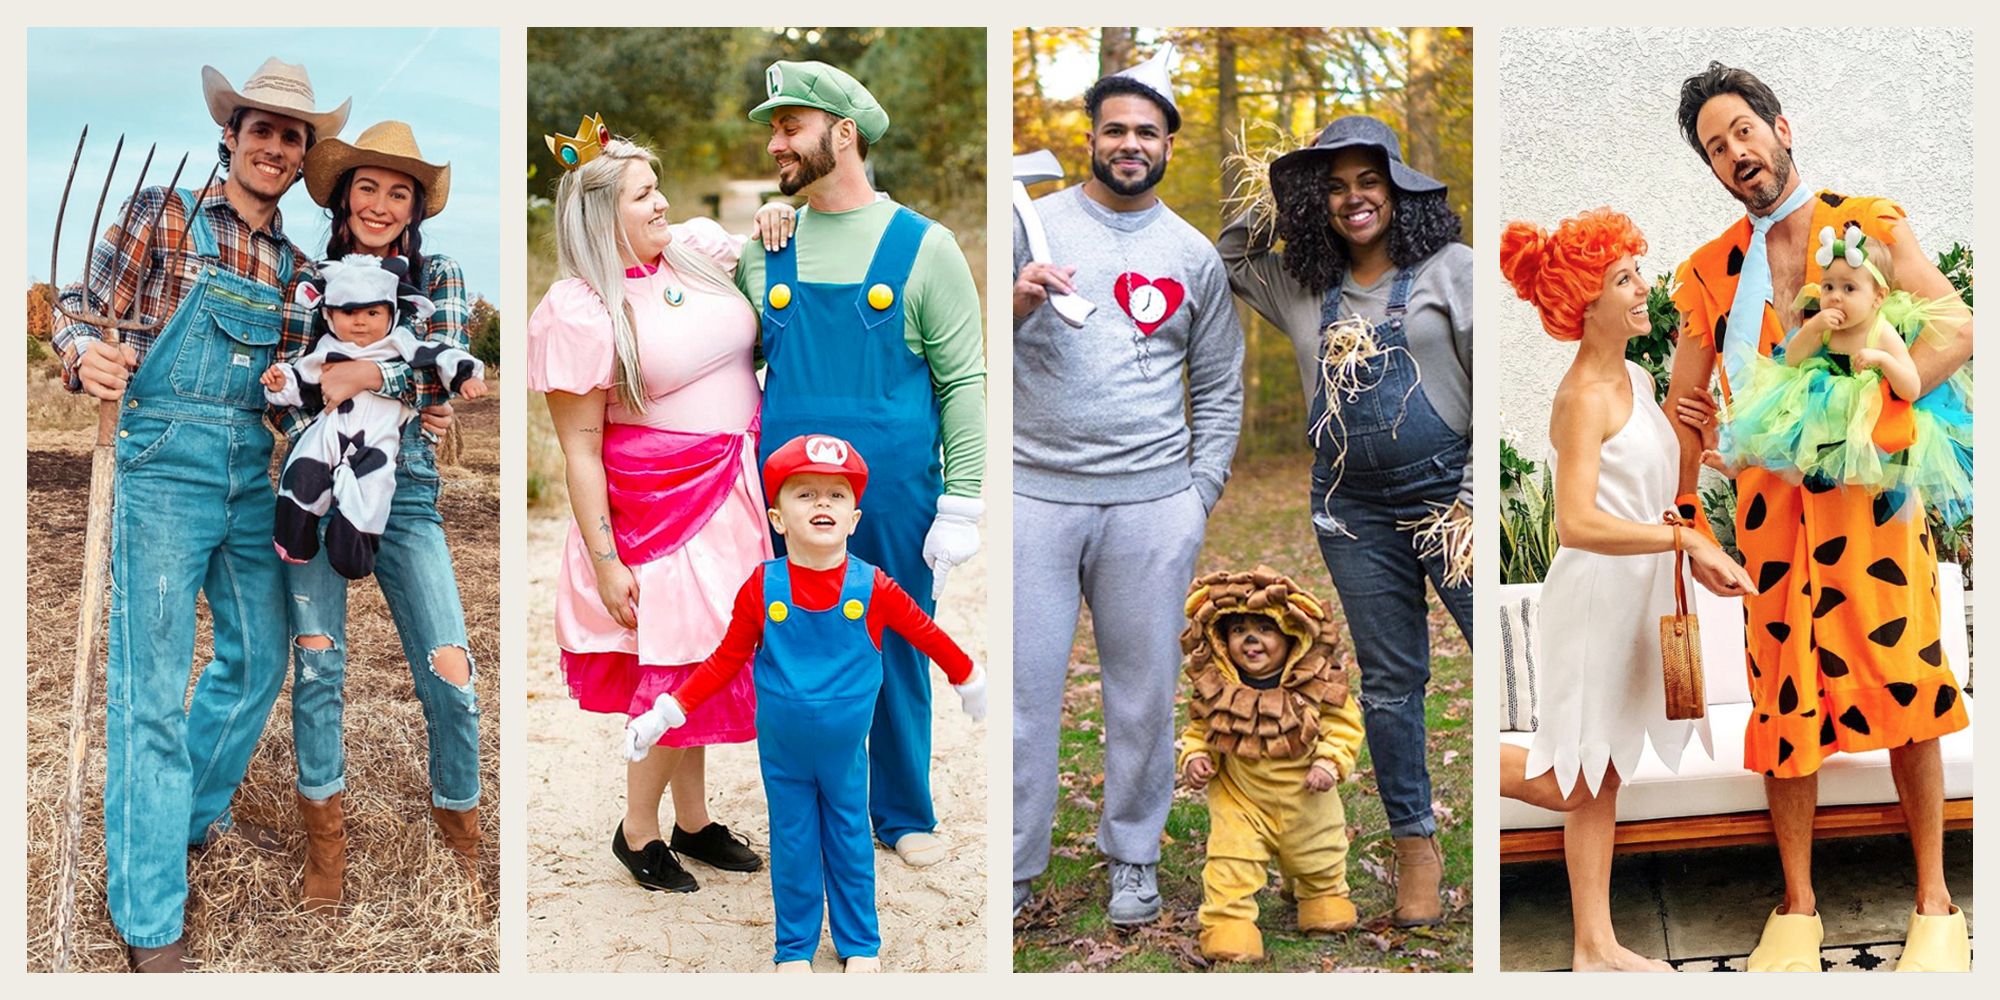 family costumes for 3